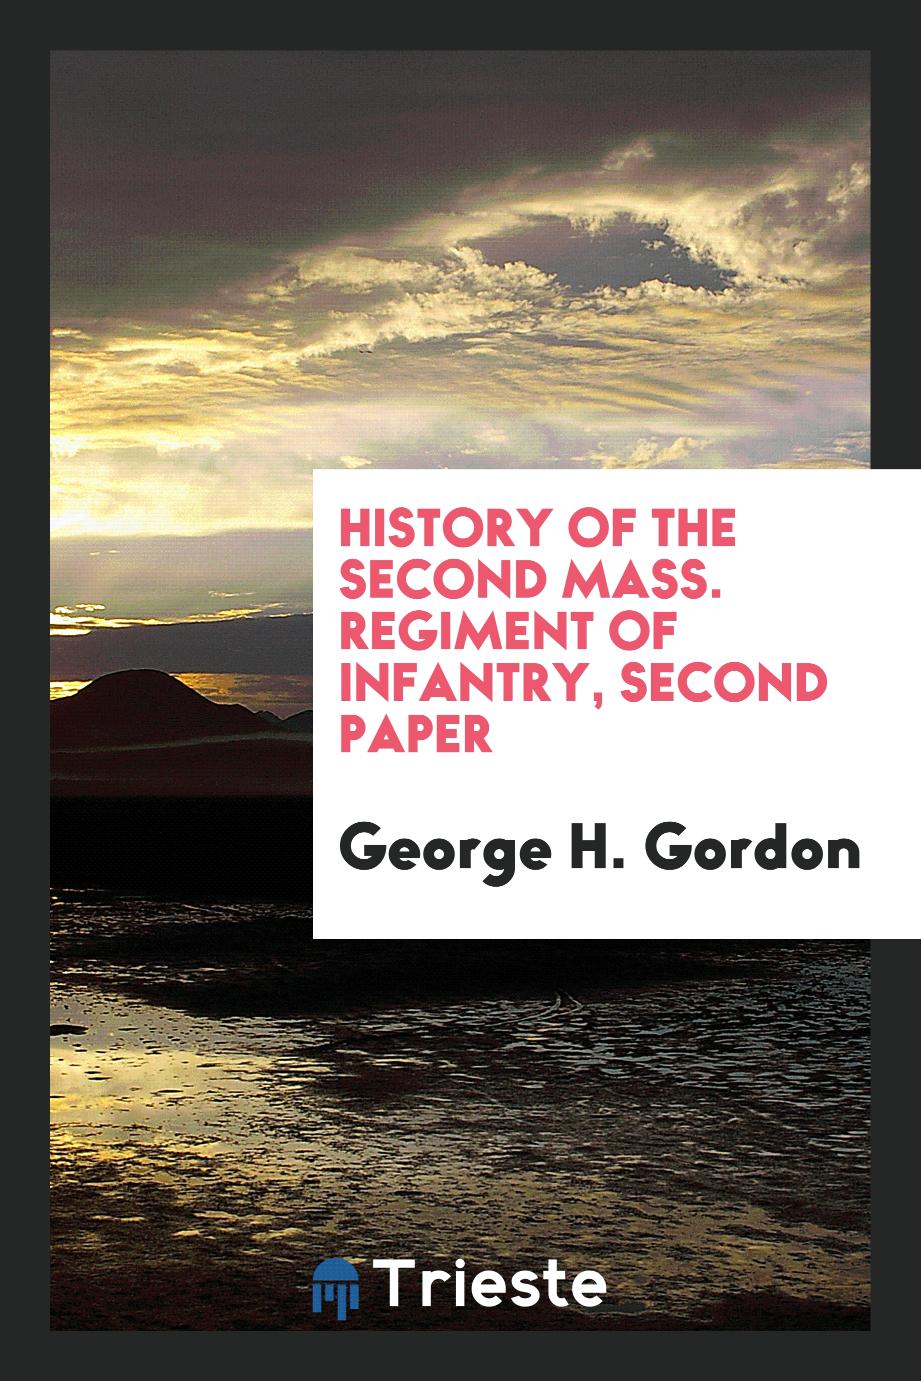 History of the Second Mass. Regiment of Infantry, Second paper